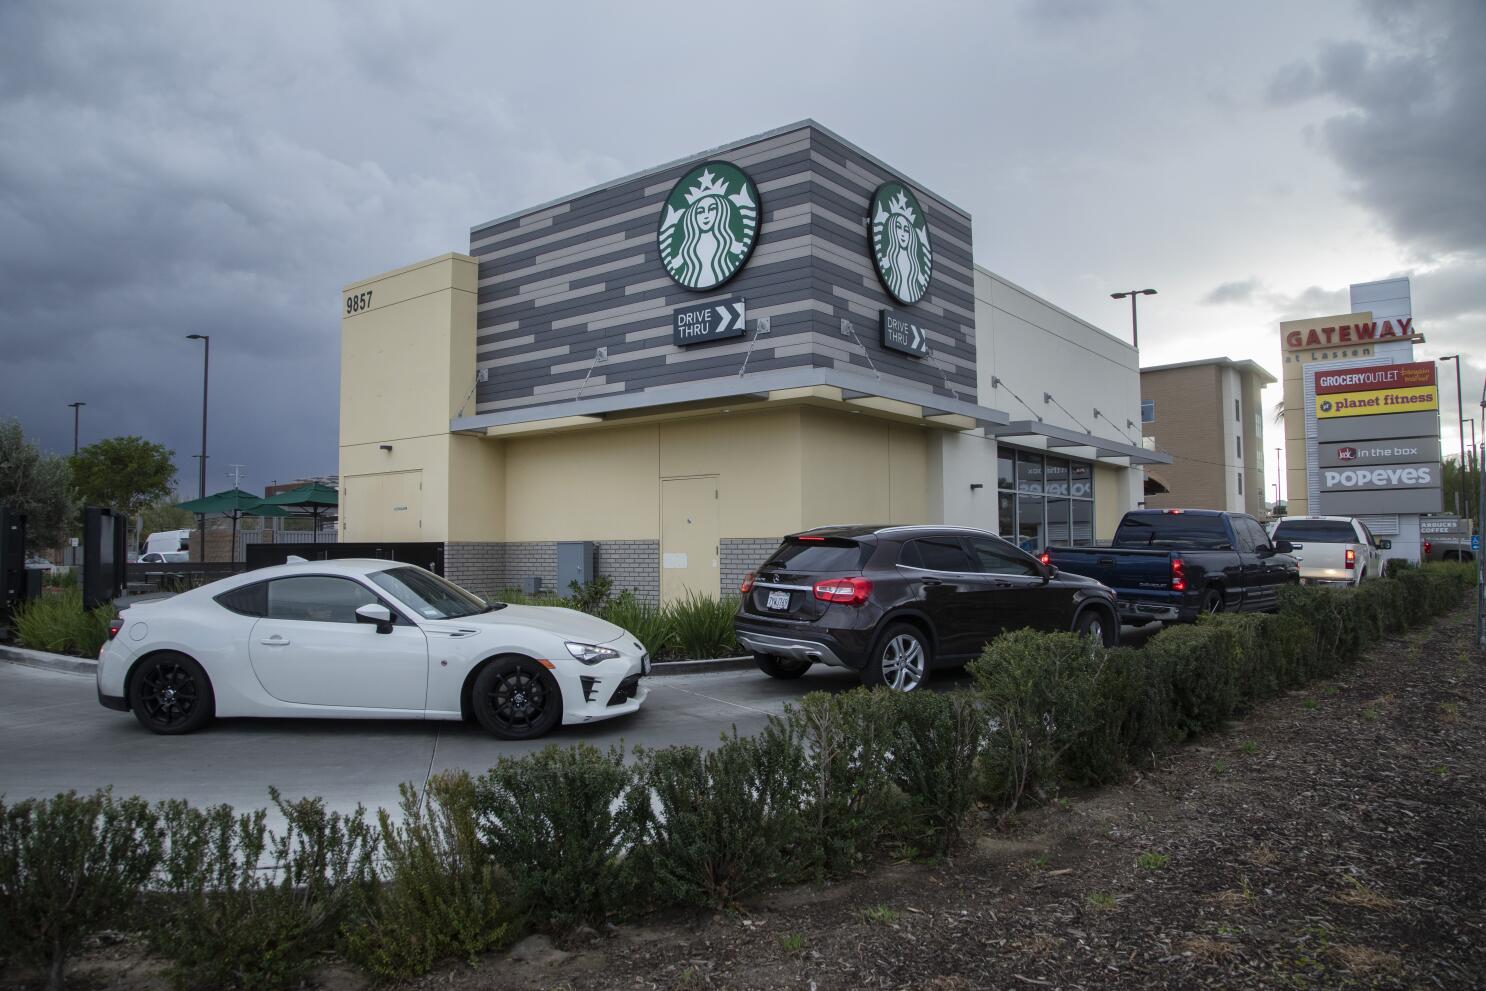 Starbucks Open During COVID-19, But Only the Drive-Thru - Eater